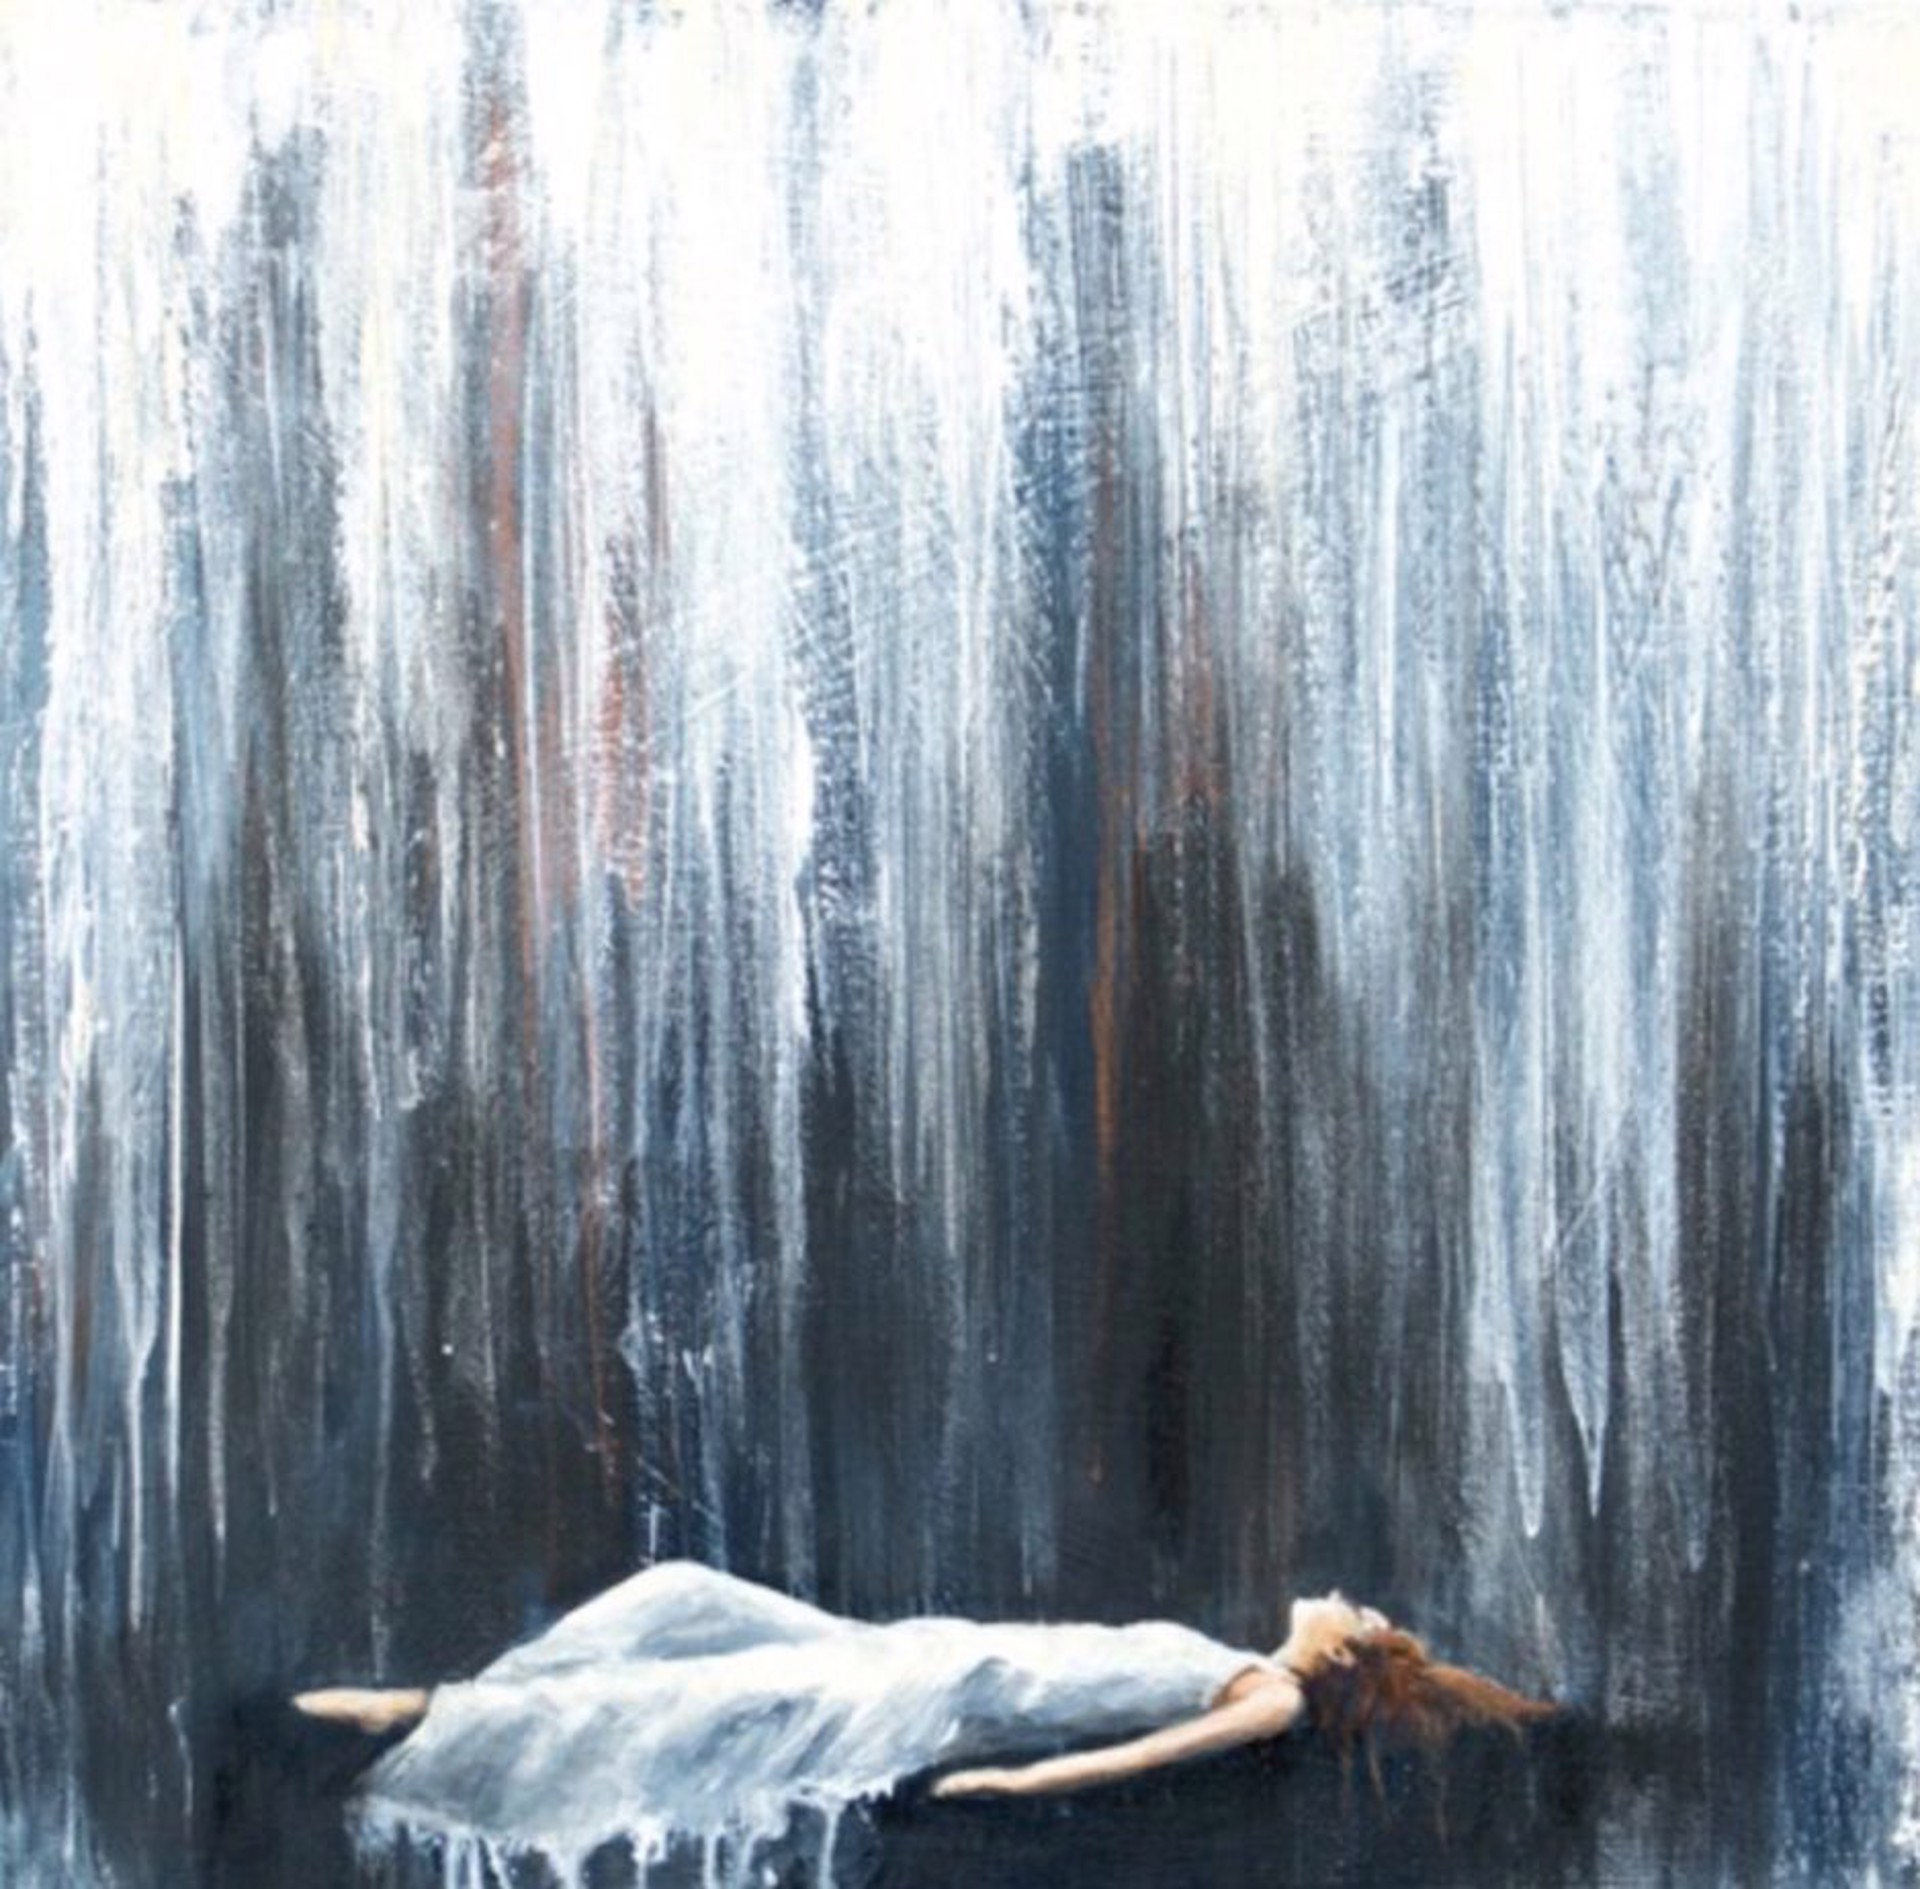 Resting in the Rain by Laura Bowman